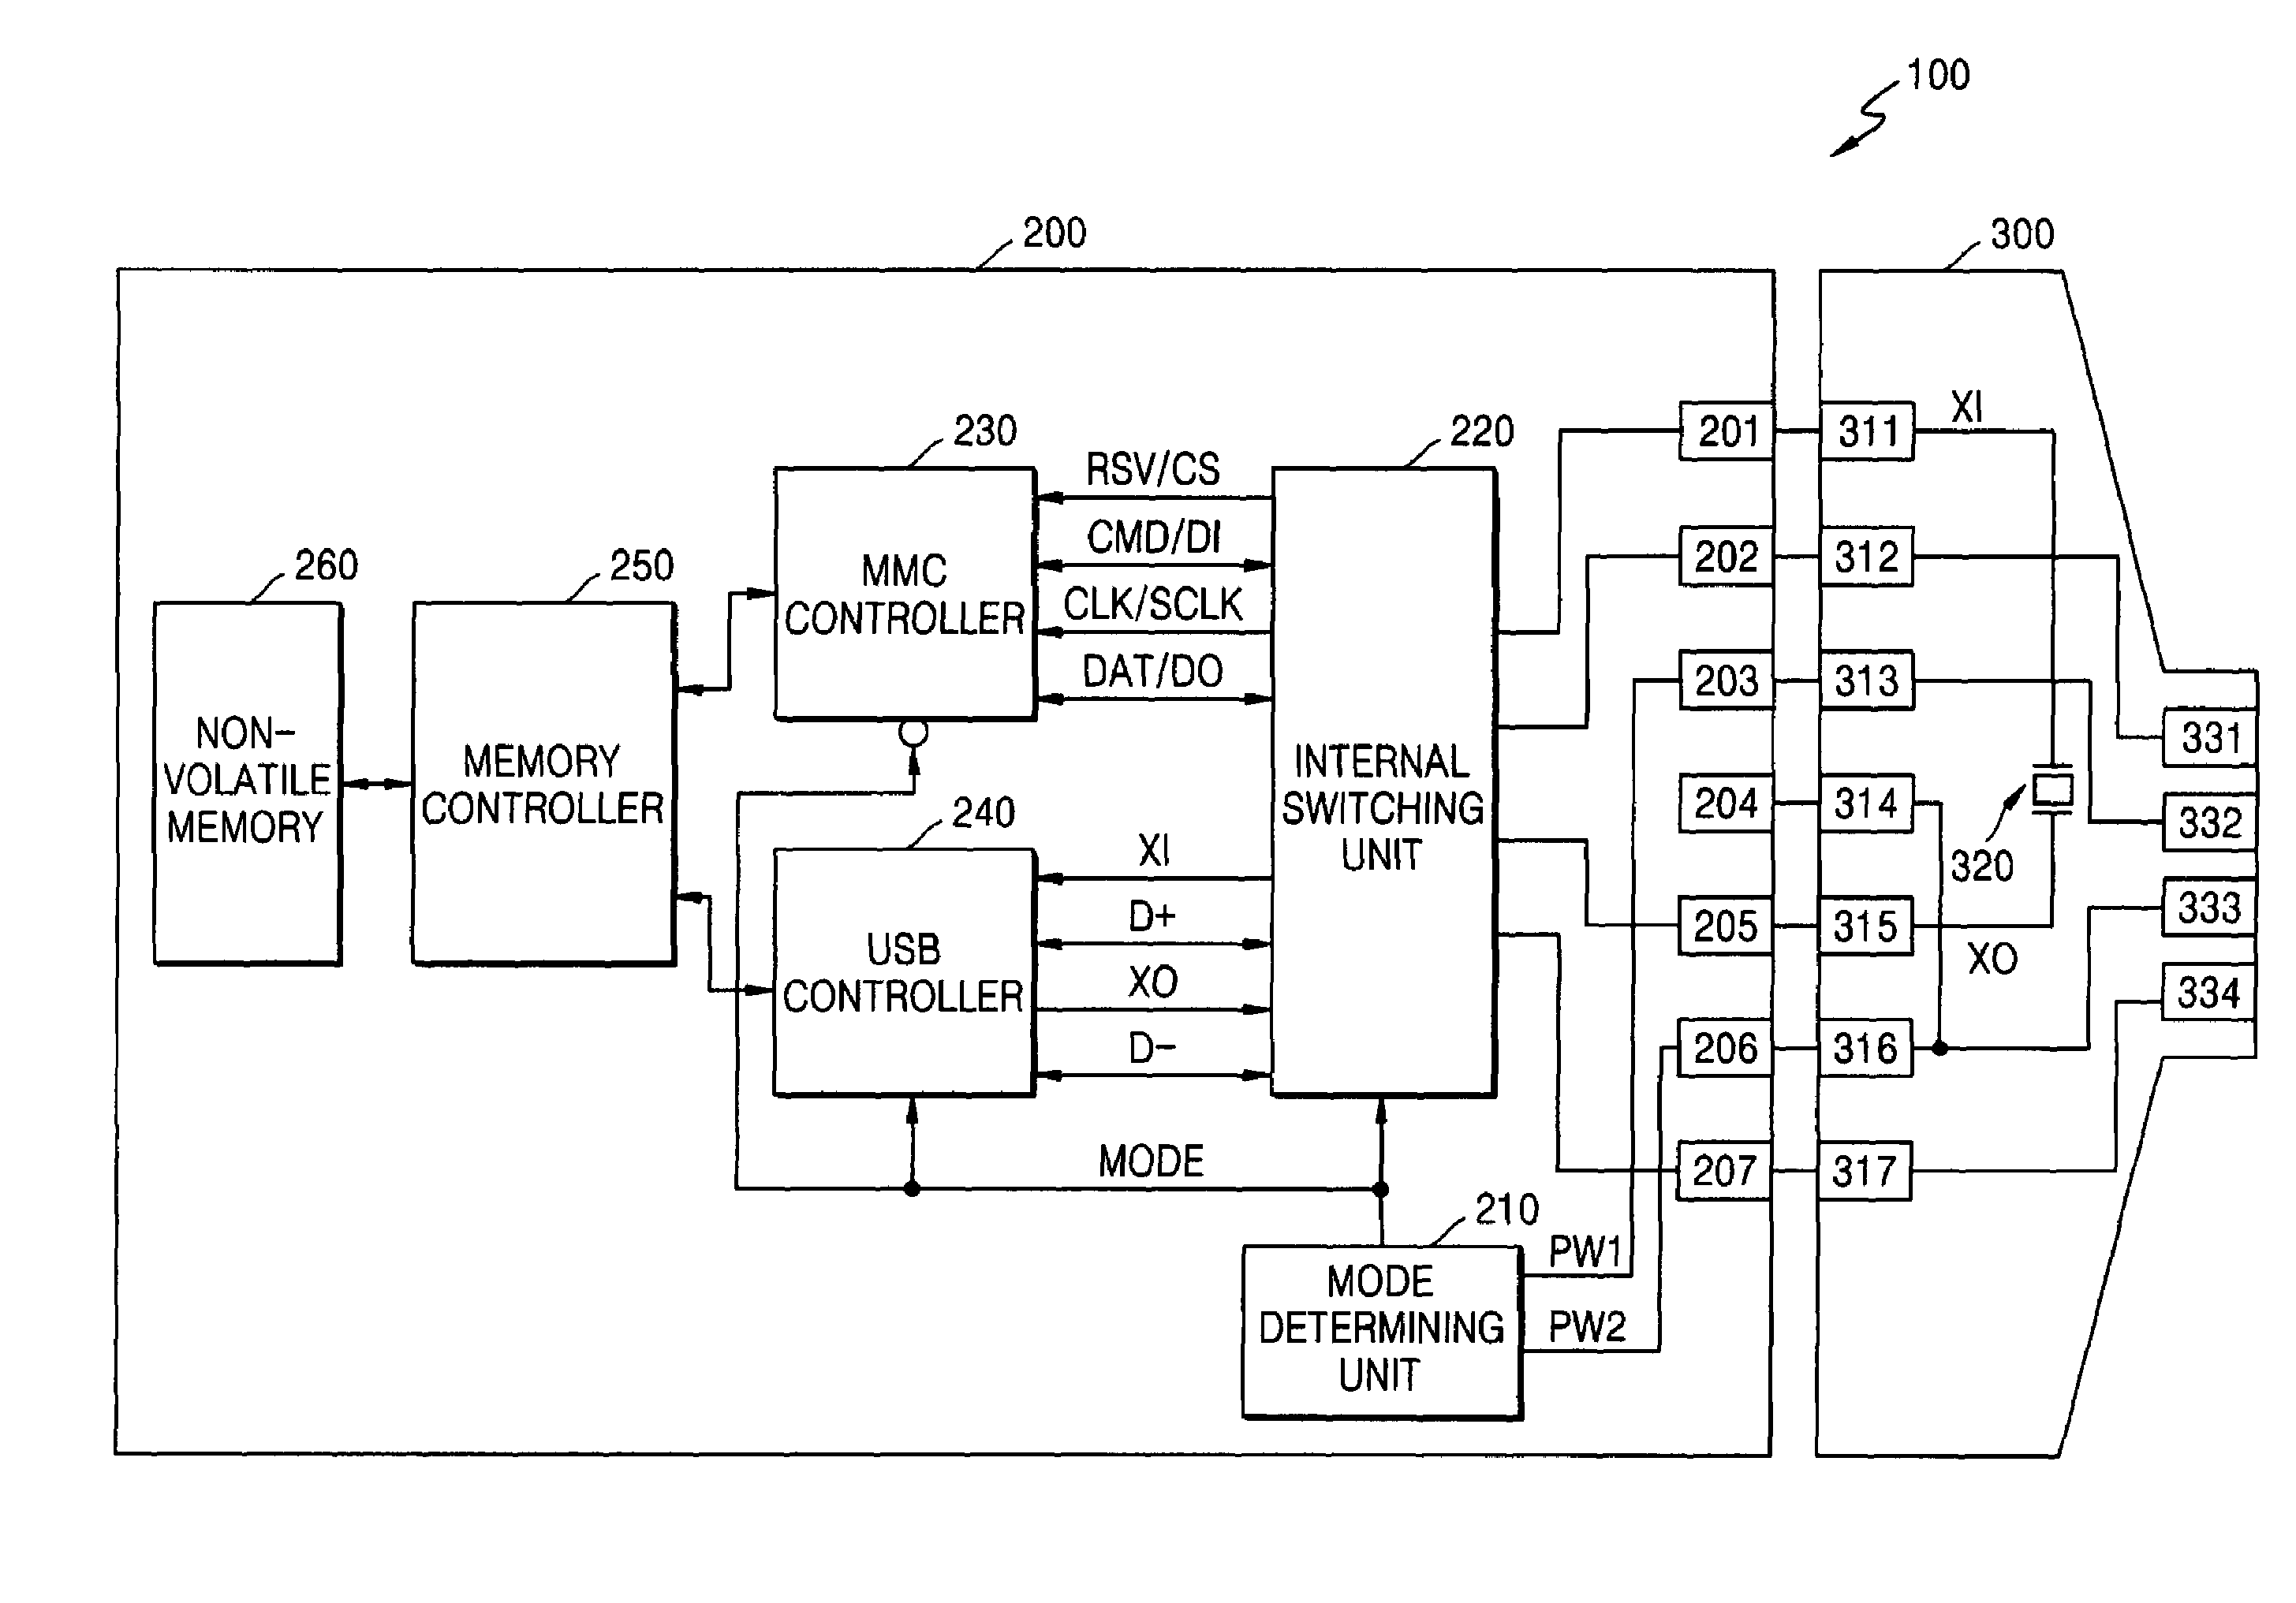 Multimedia/secure digital cards and adapters for interfacing using voltage levels to determine host types and methods of operating